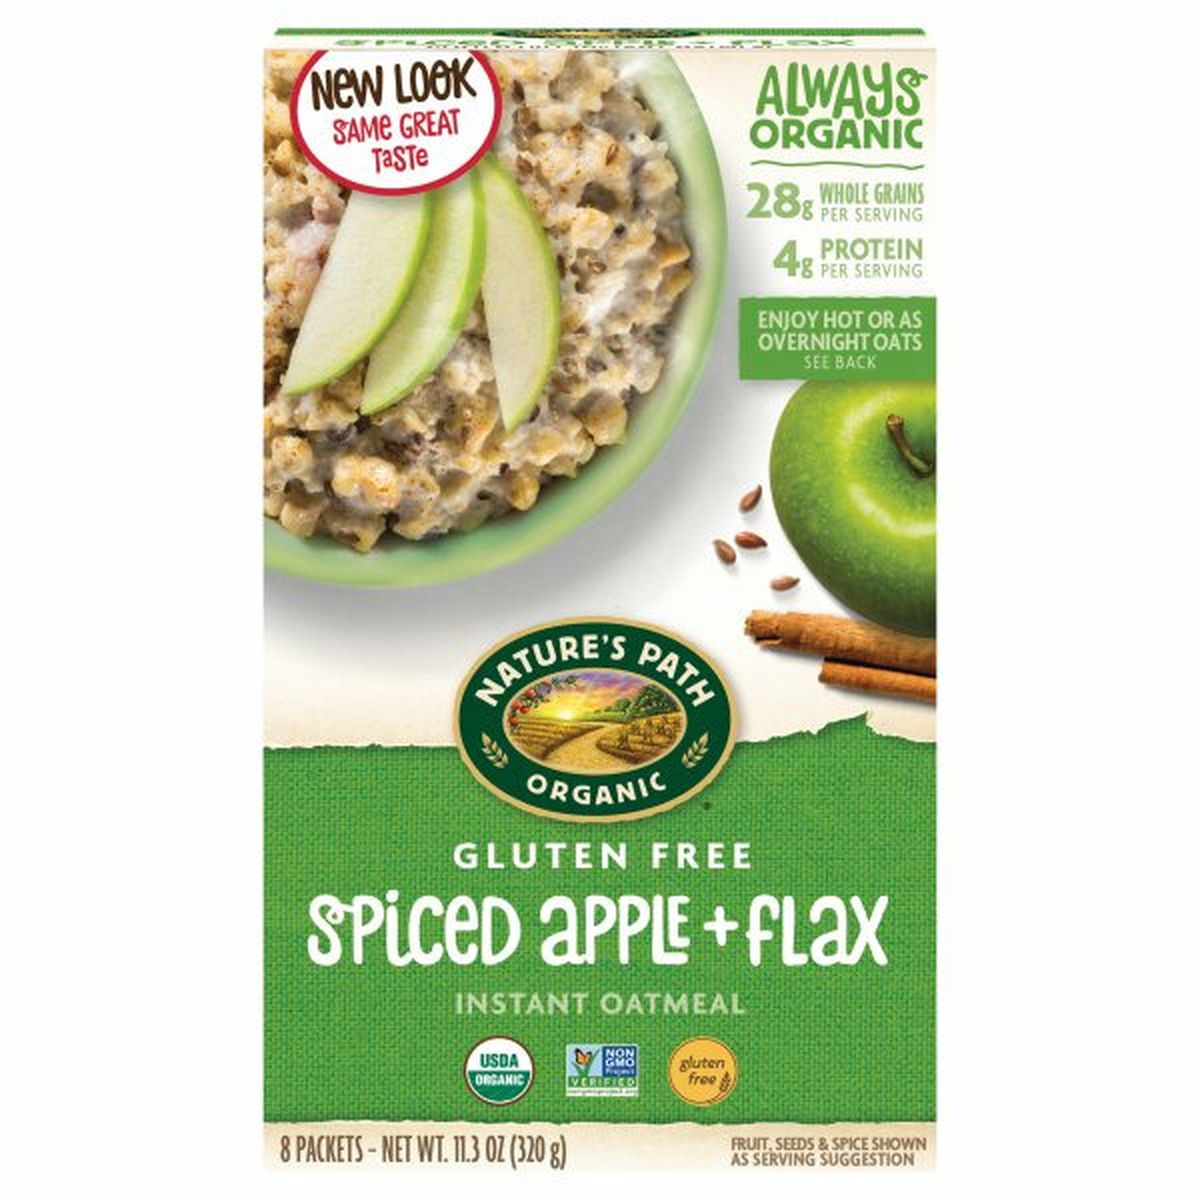 Calories in Nature's Path Instant Oatmeal, Gluten Free, Spiced Apple + Flax